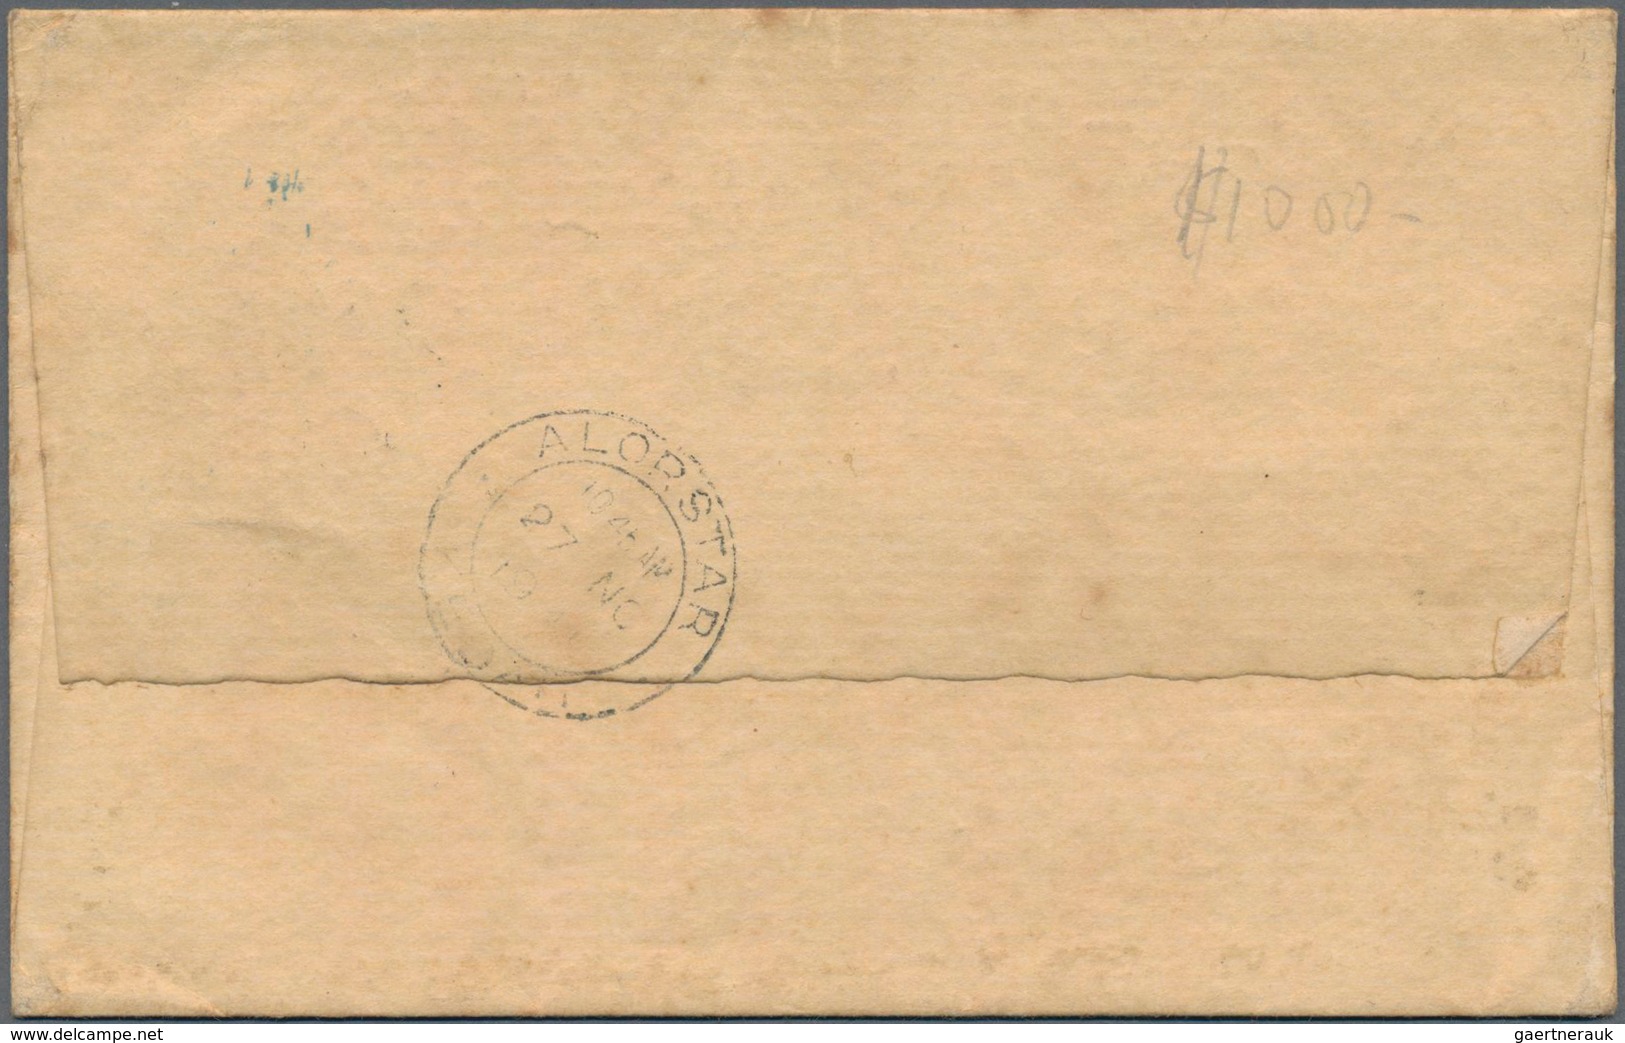 Malaiische Staaten - Selangor: 1941 R.A.F. Censored Cover To R.A.F. Station Kallang, Re-directed To - Selangor